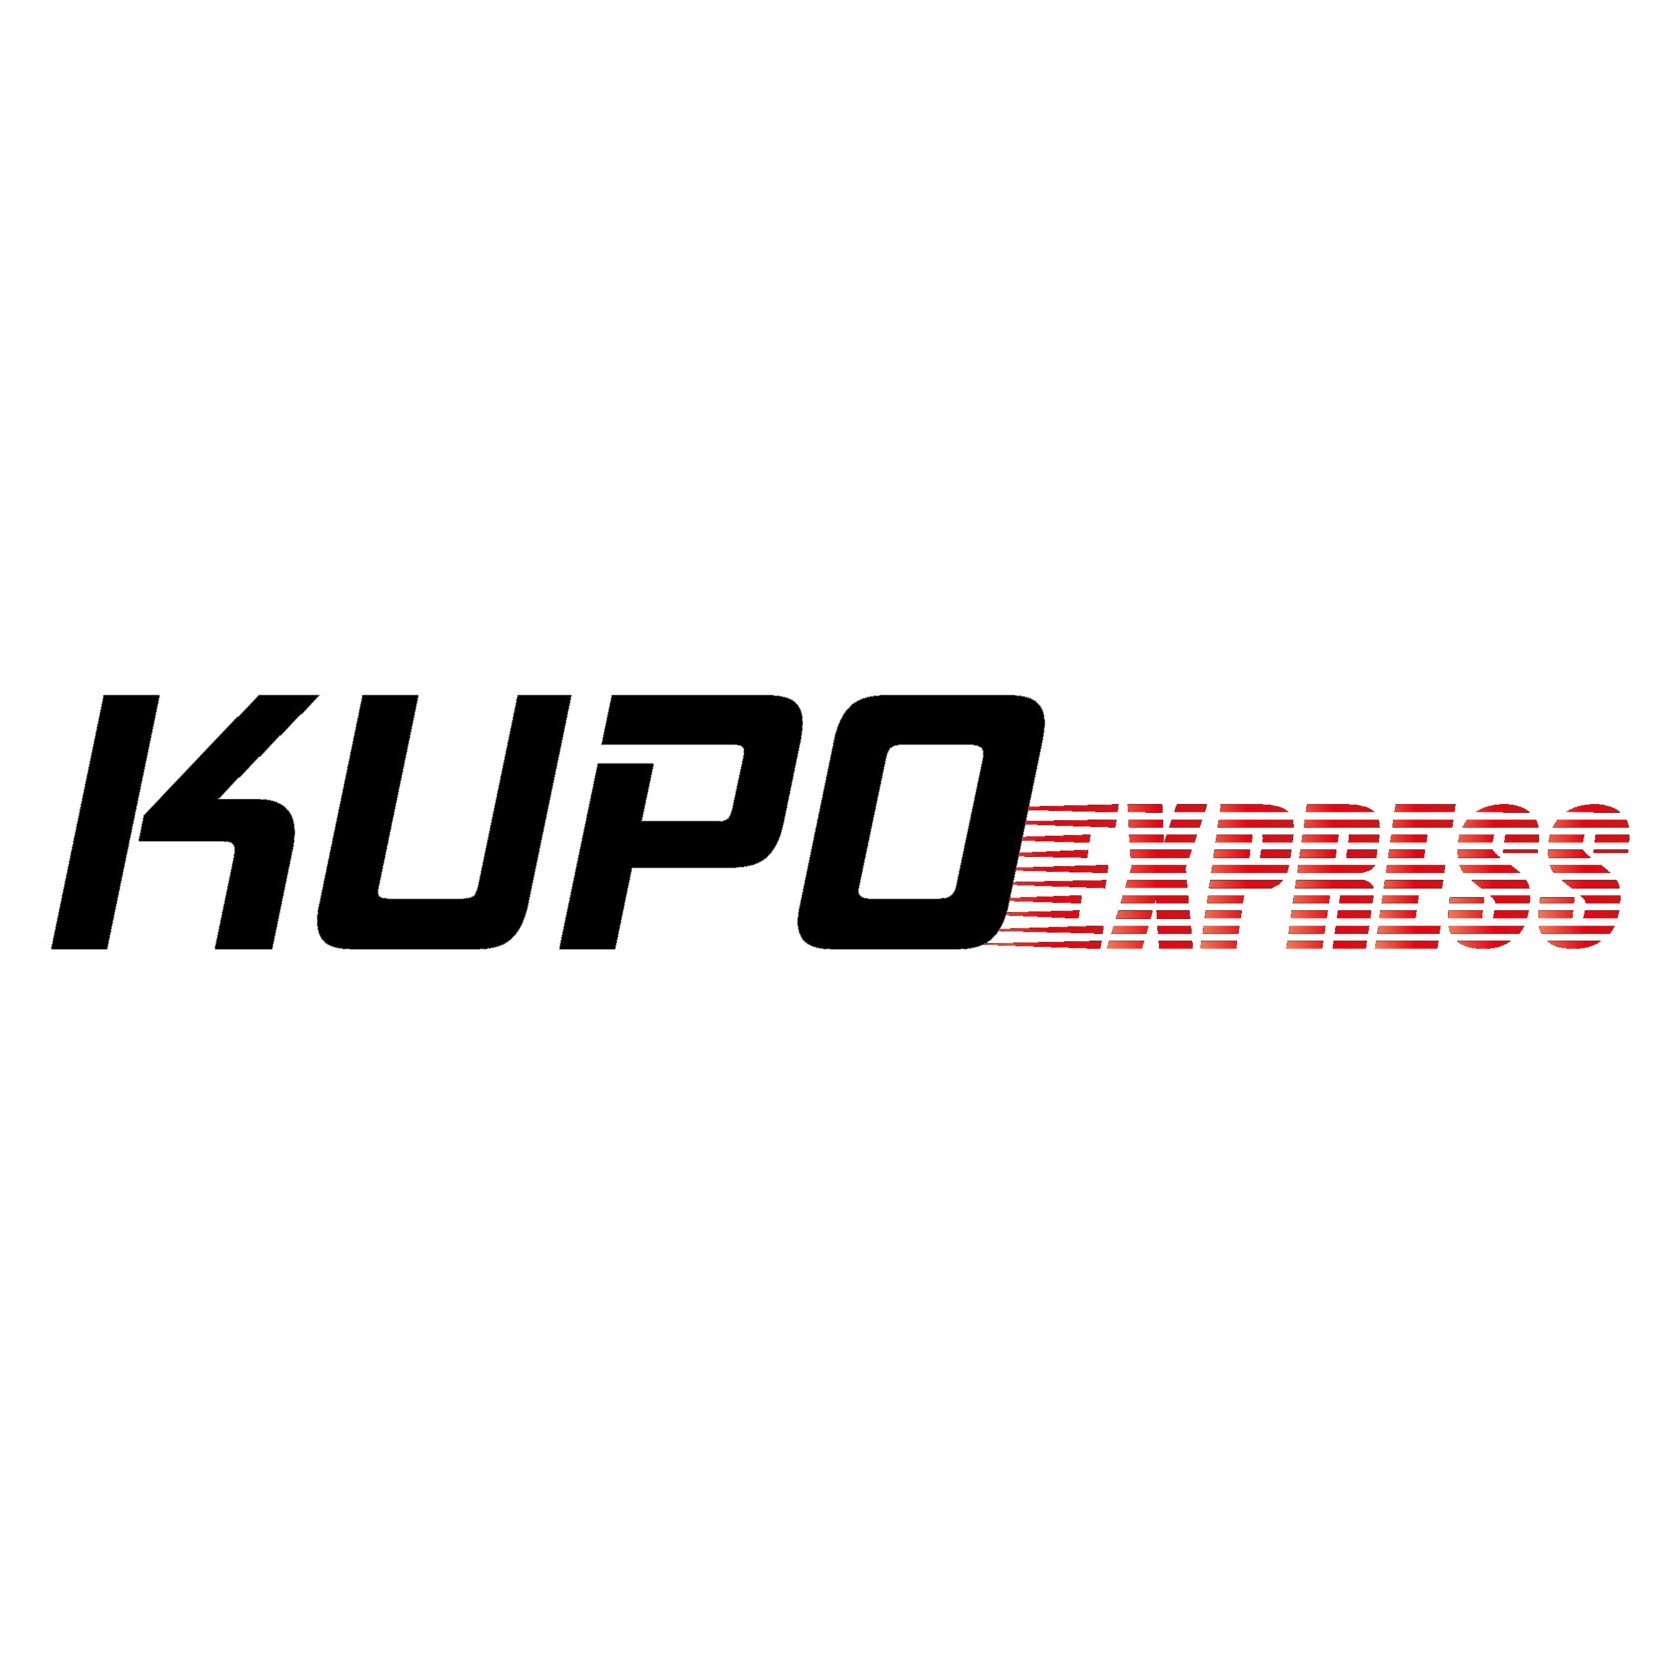 #KupoExpress is one of the world's leading #OnlineDiscountStores. Be sure to follow us to keep up with latest trending products today! #OnlineShoppingStore